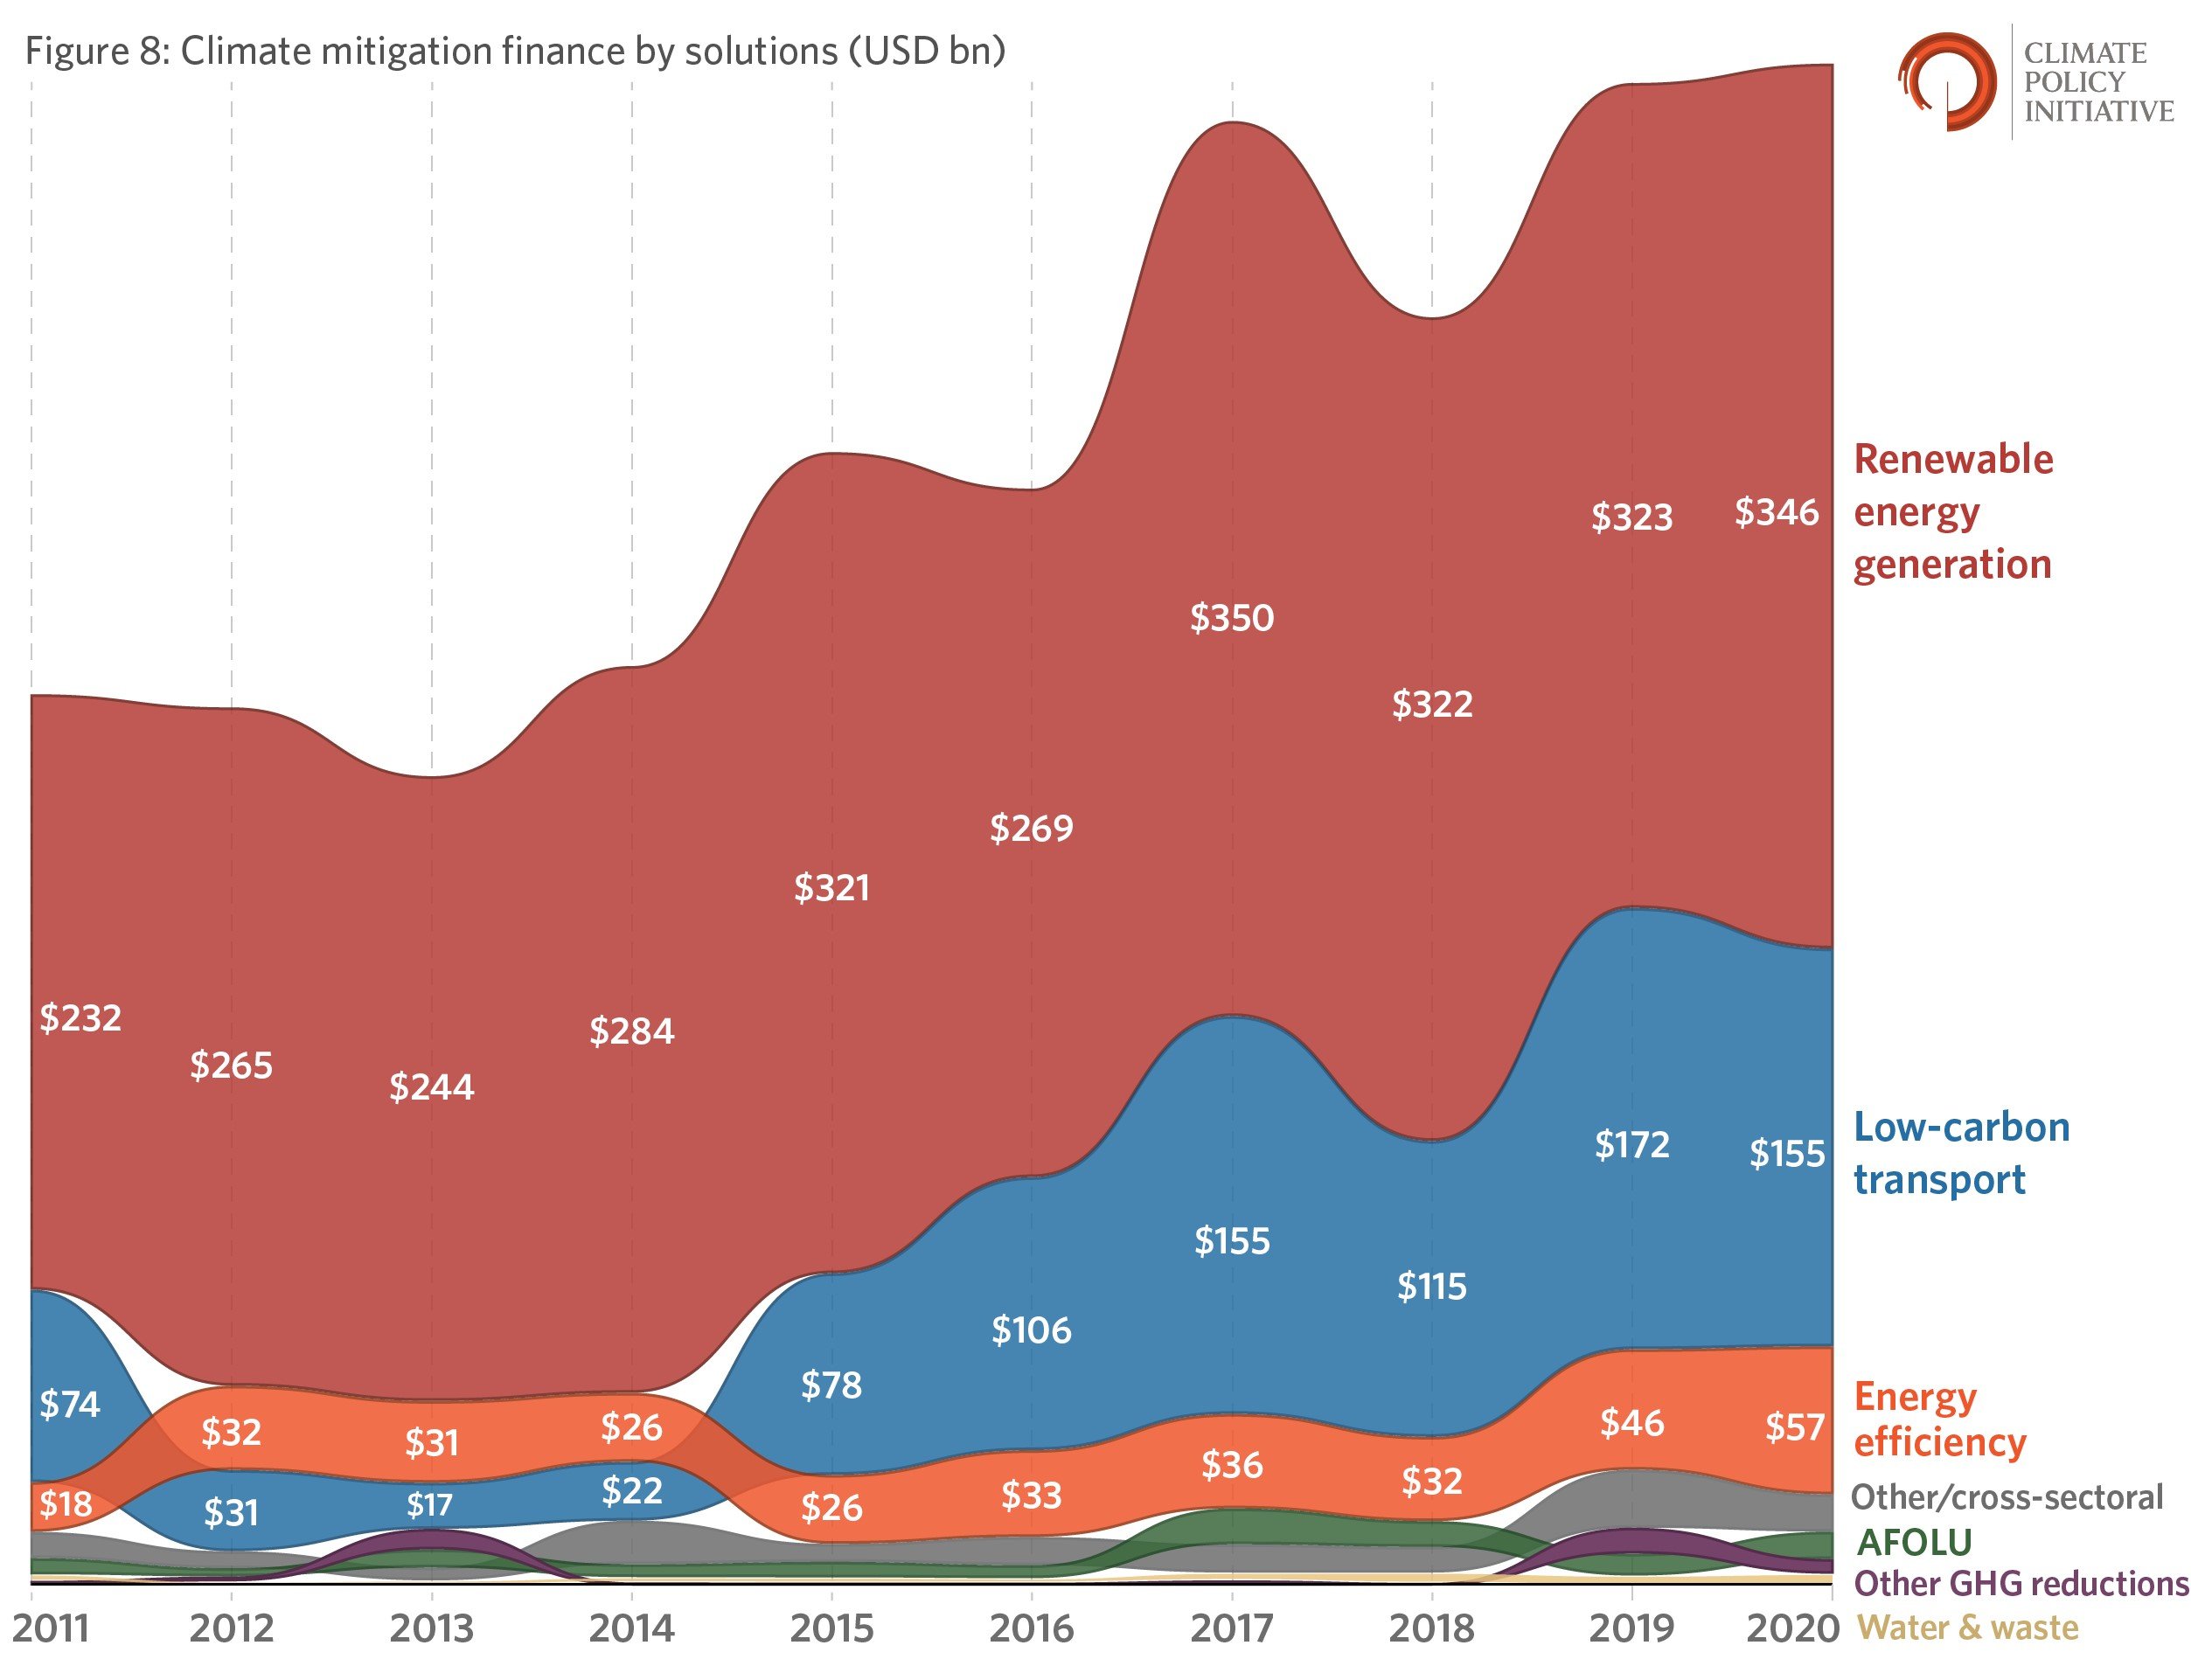 Infographic showing climate mitigation finance by solutions